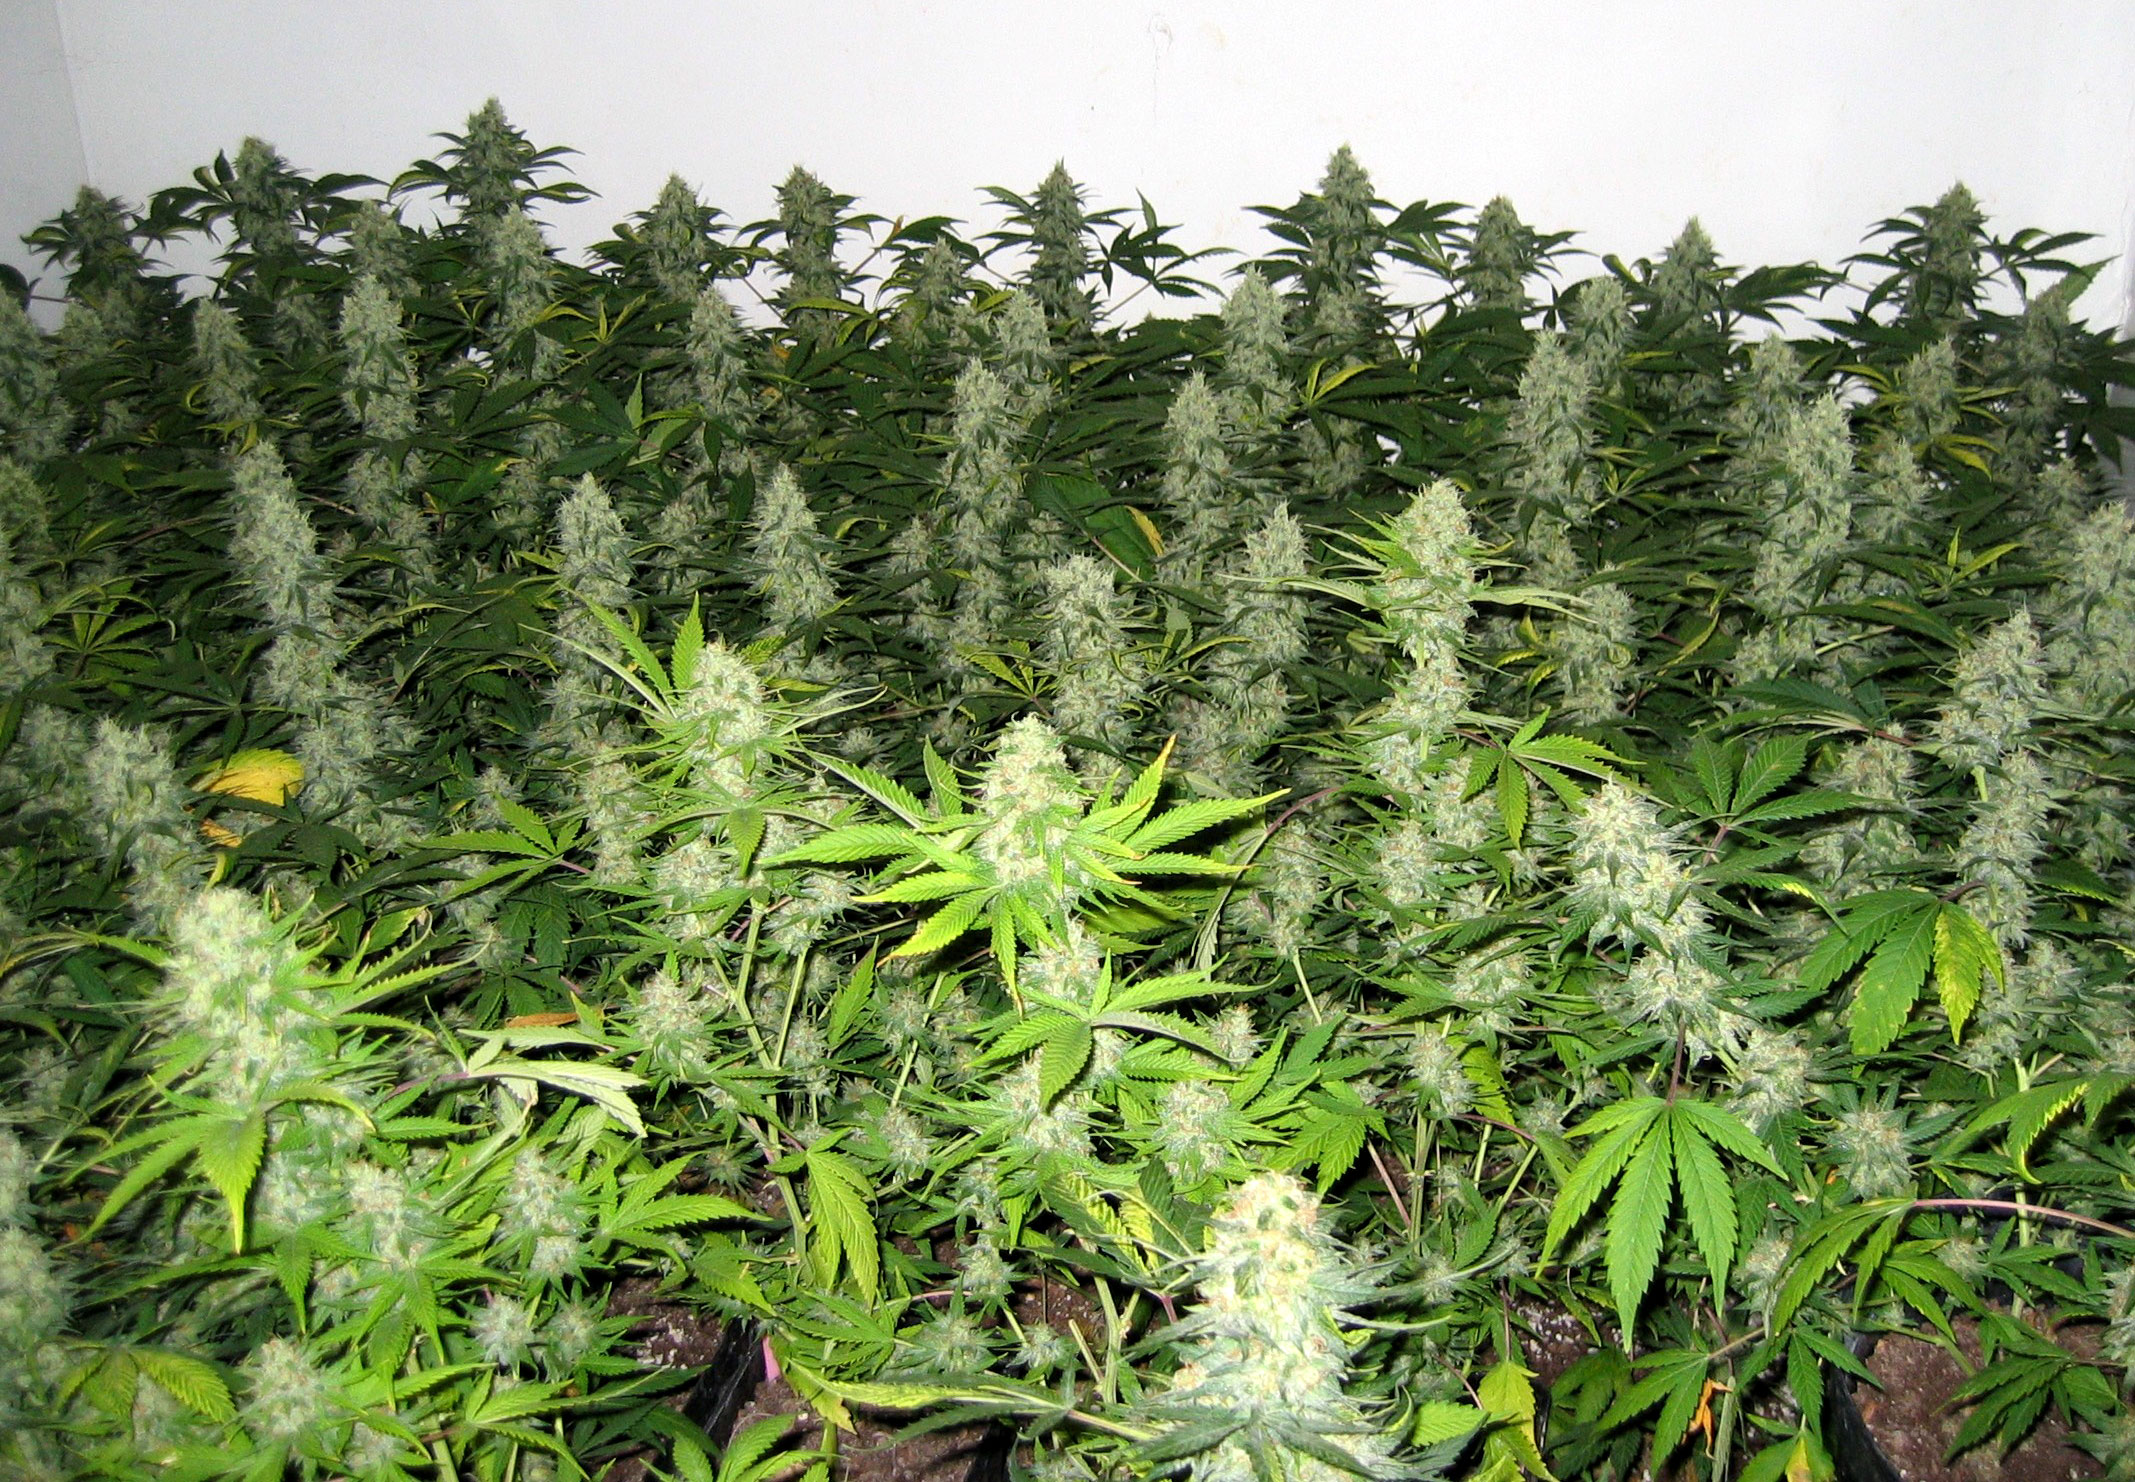 Example of a SoG in action with Master Kush plants. Beautiful!